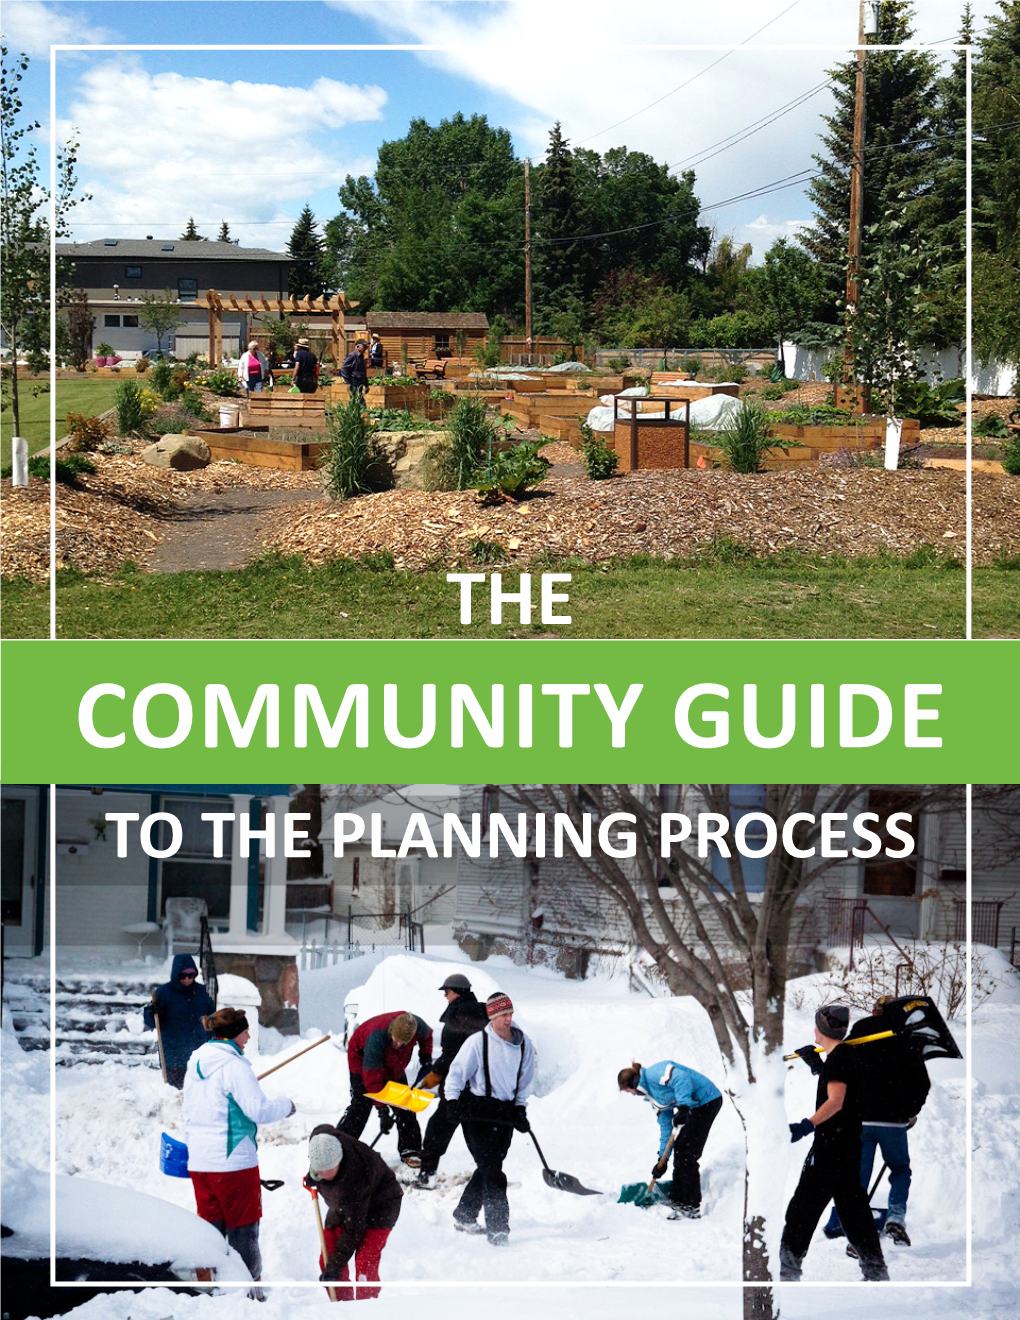 Planning Committee Guide, As Well As a Number of Tools and Resources for Increasing Community Involvement in the Planning Process